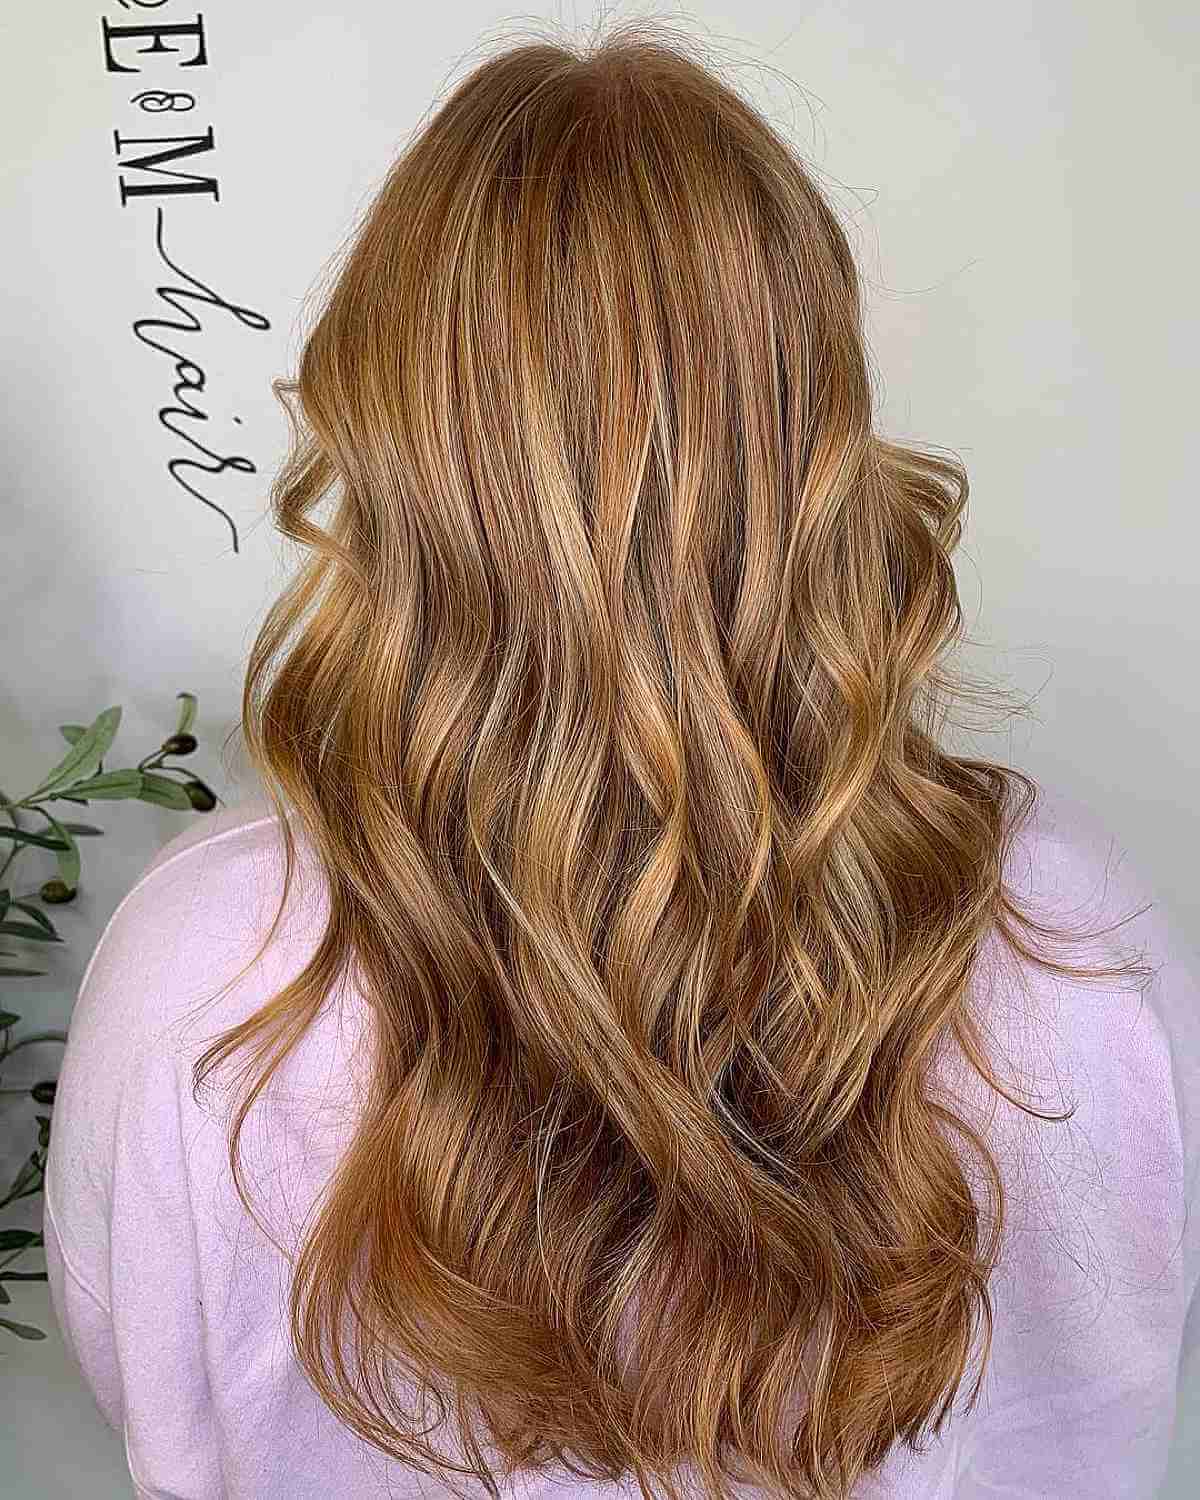 Long Hair with Strawberry Blonde Highlights